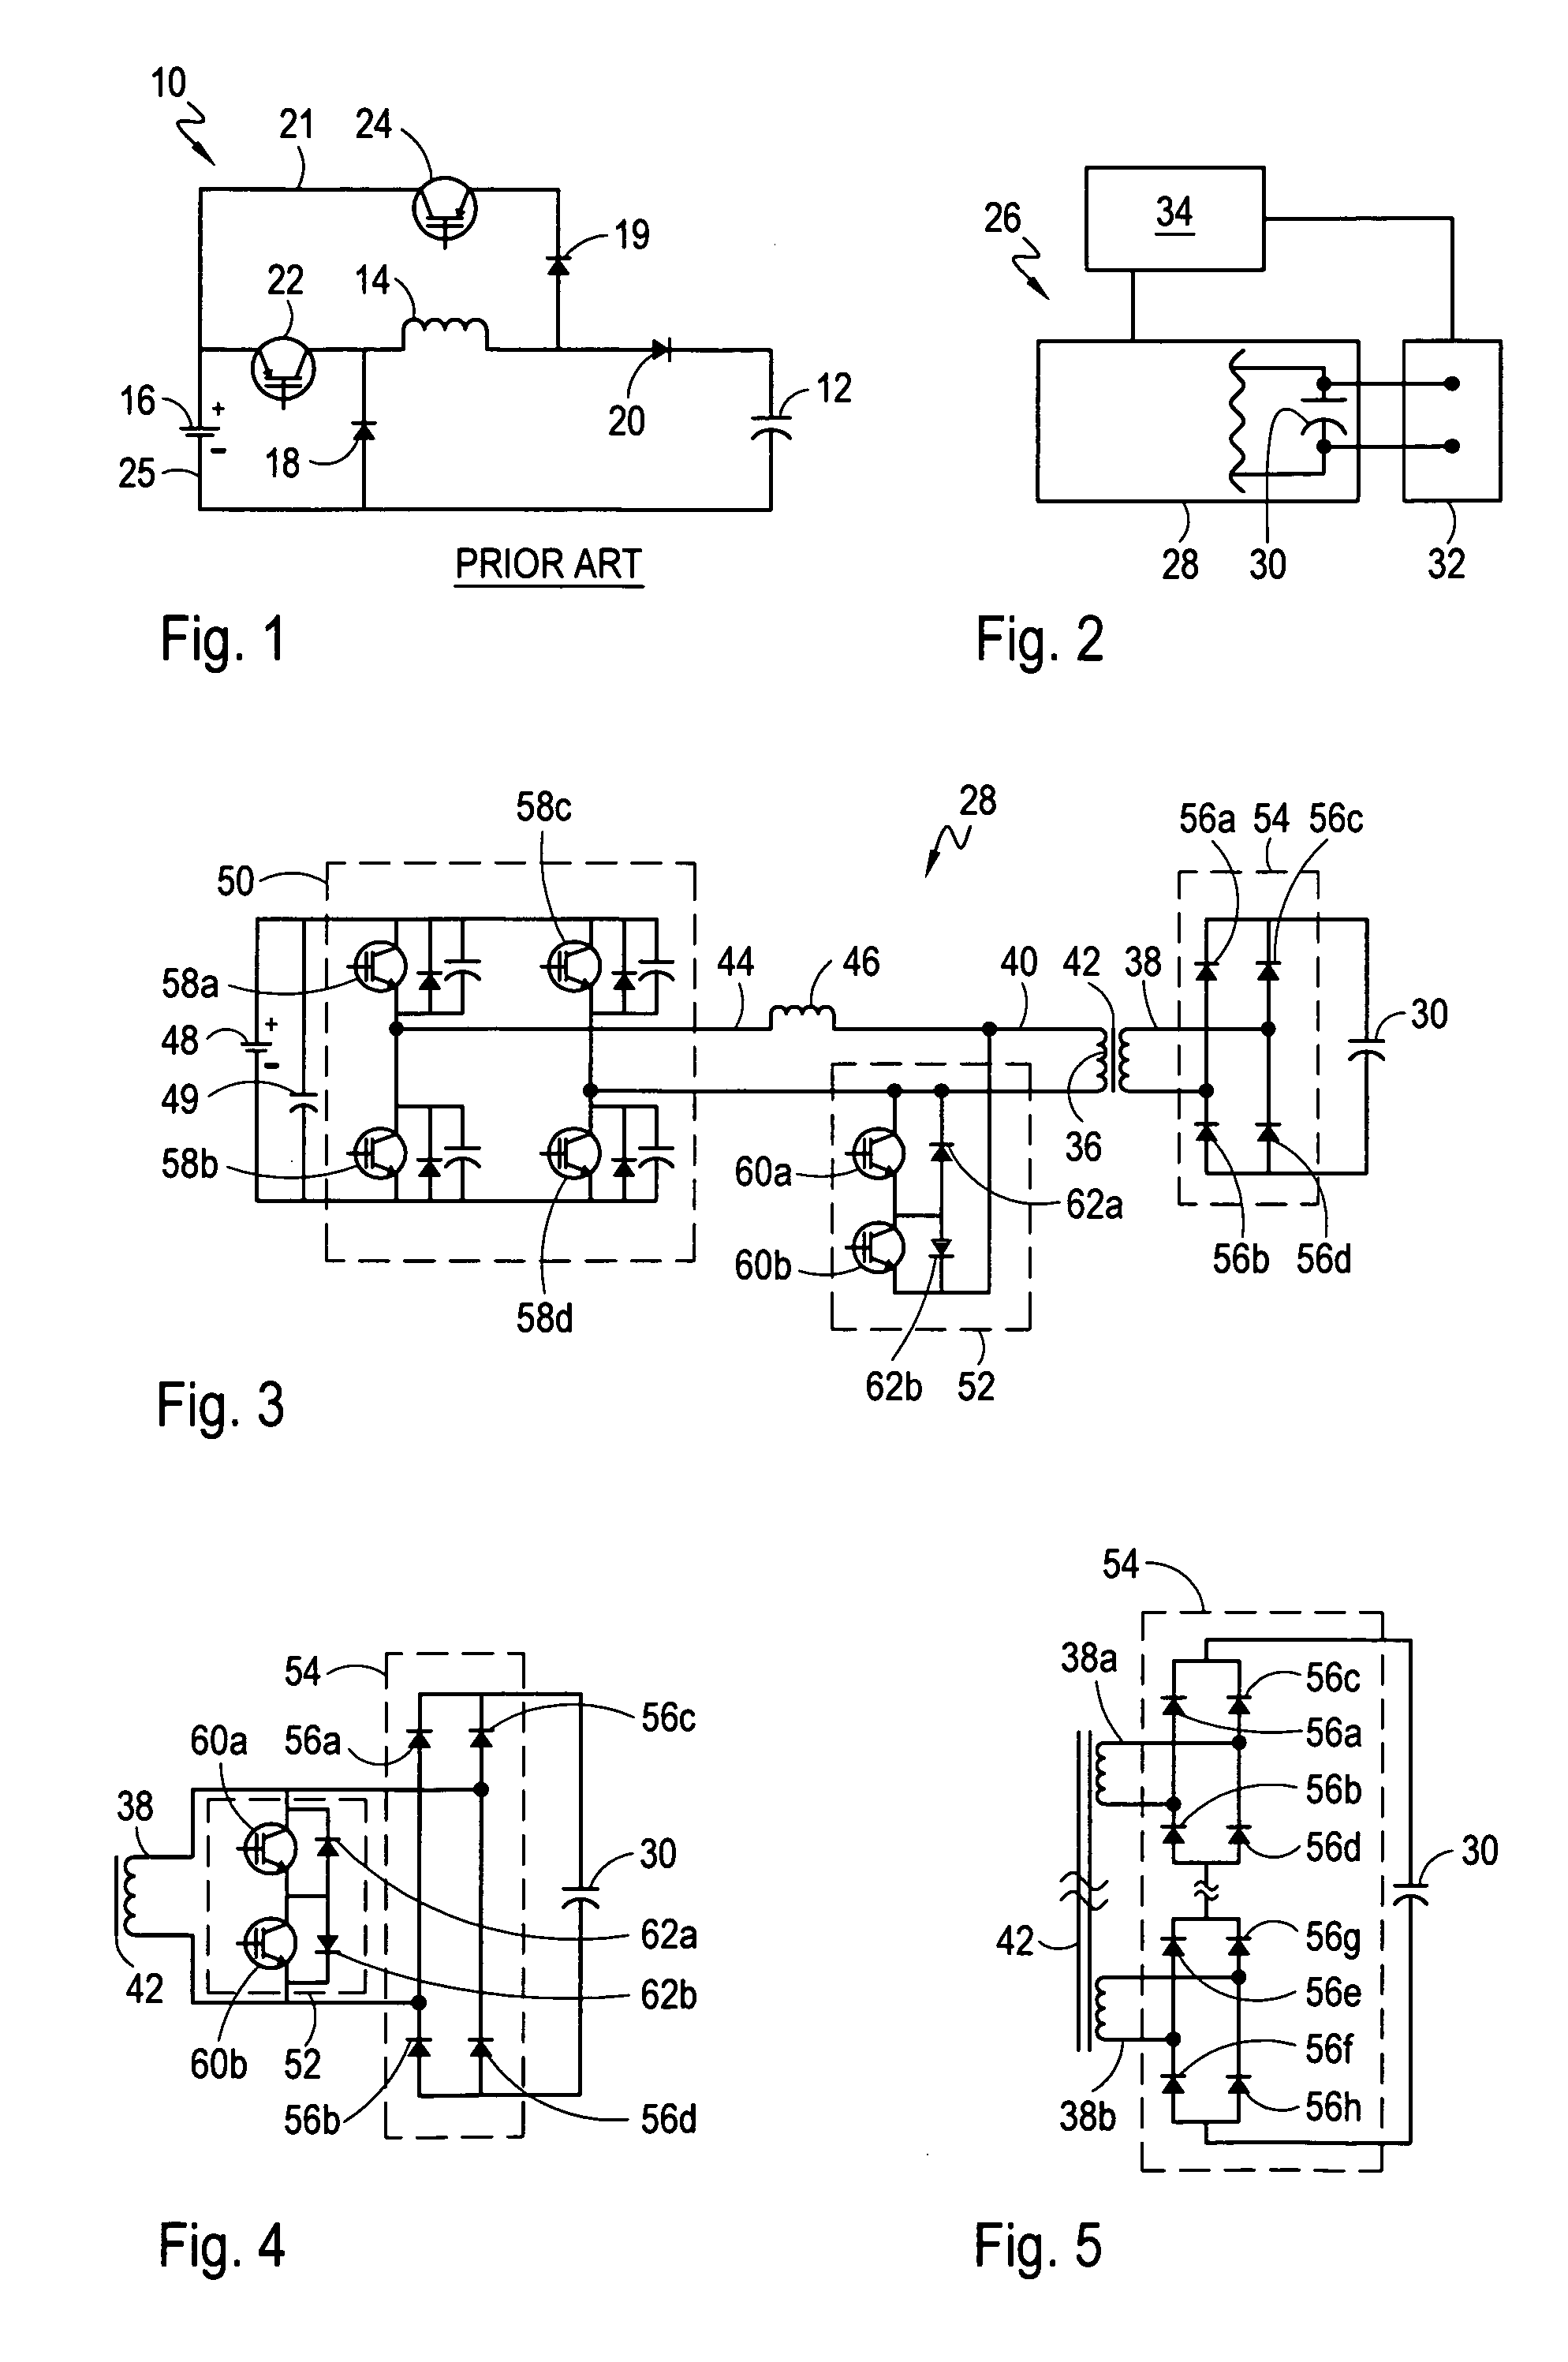 Resonant charge power supply topology for high pulse rate pulsed power systems